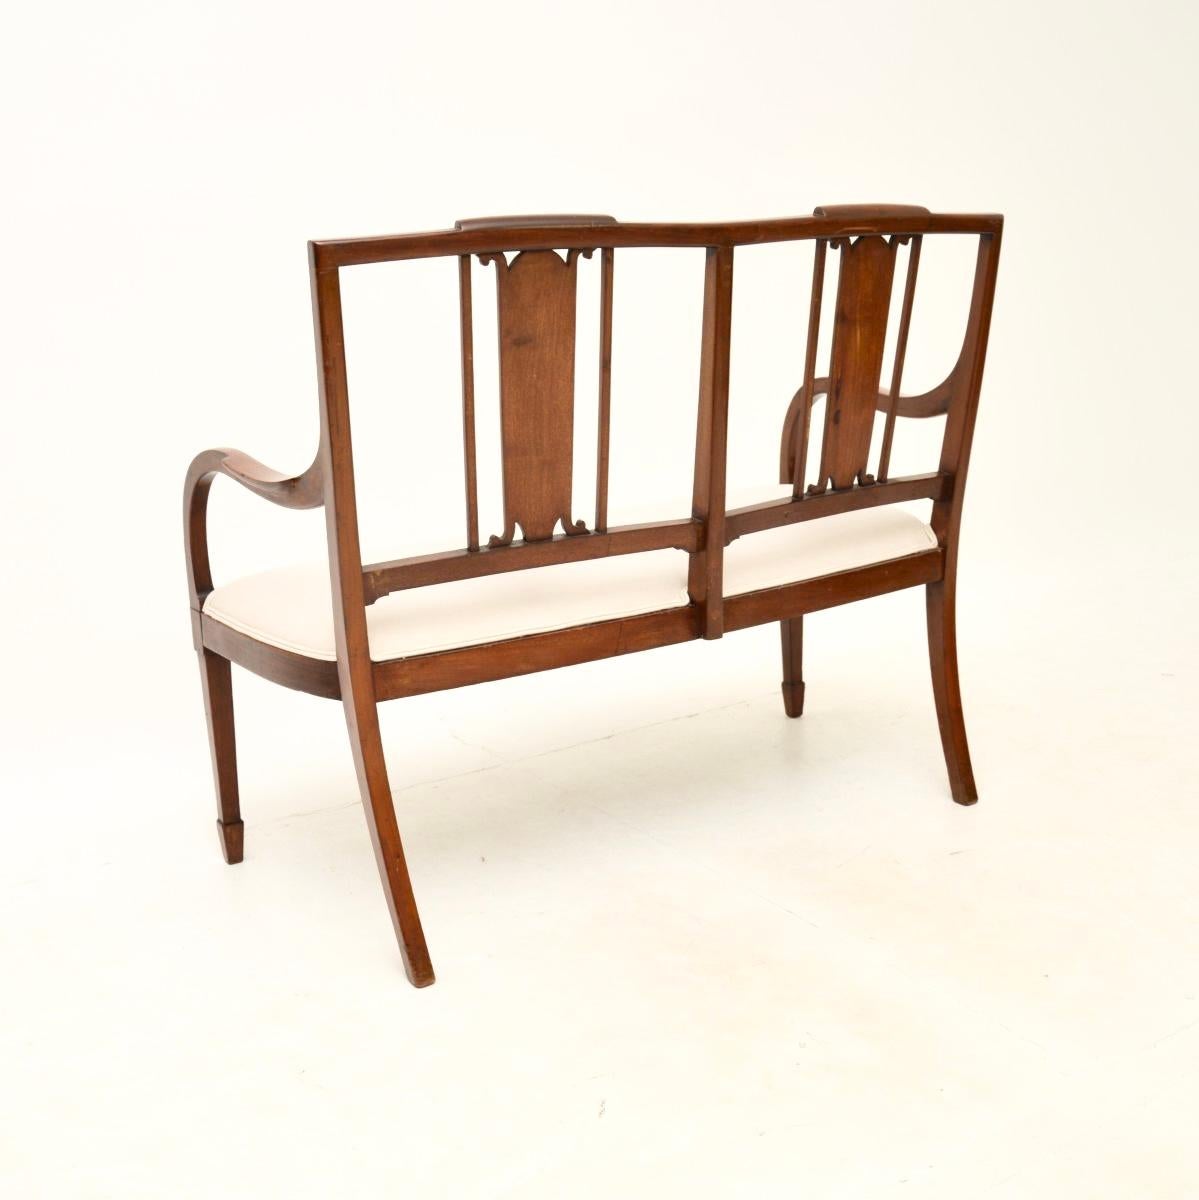 Early 20th Century Antique Edwardian Inlaid Settee For Sale